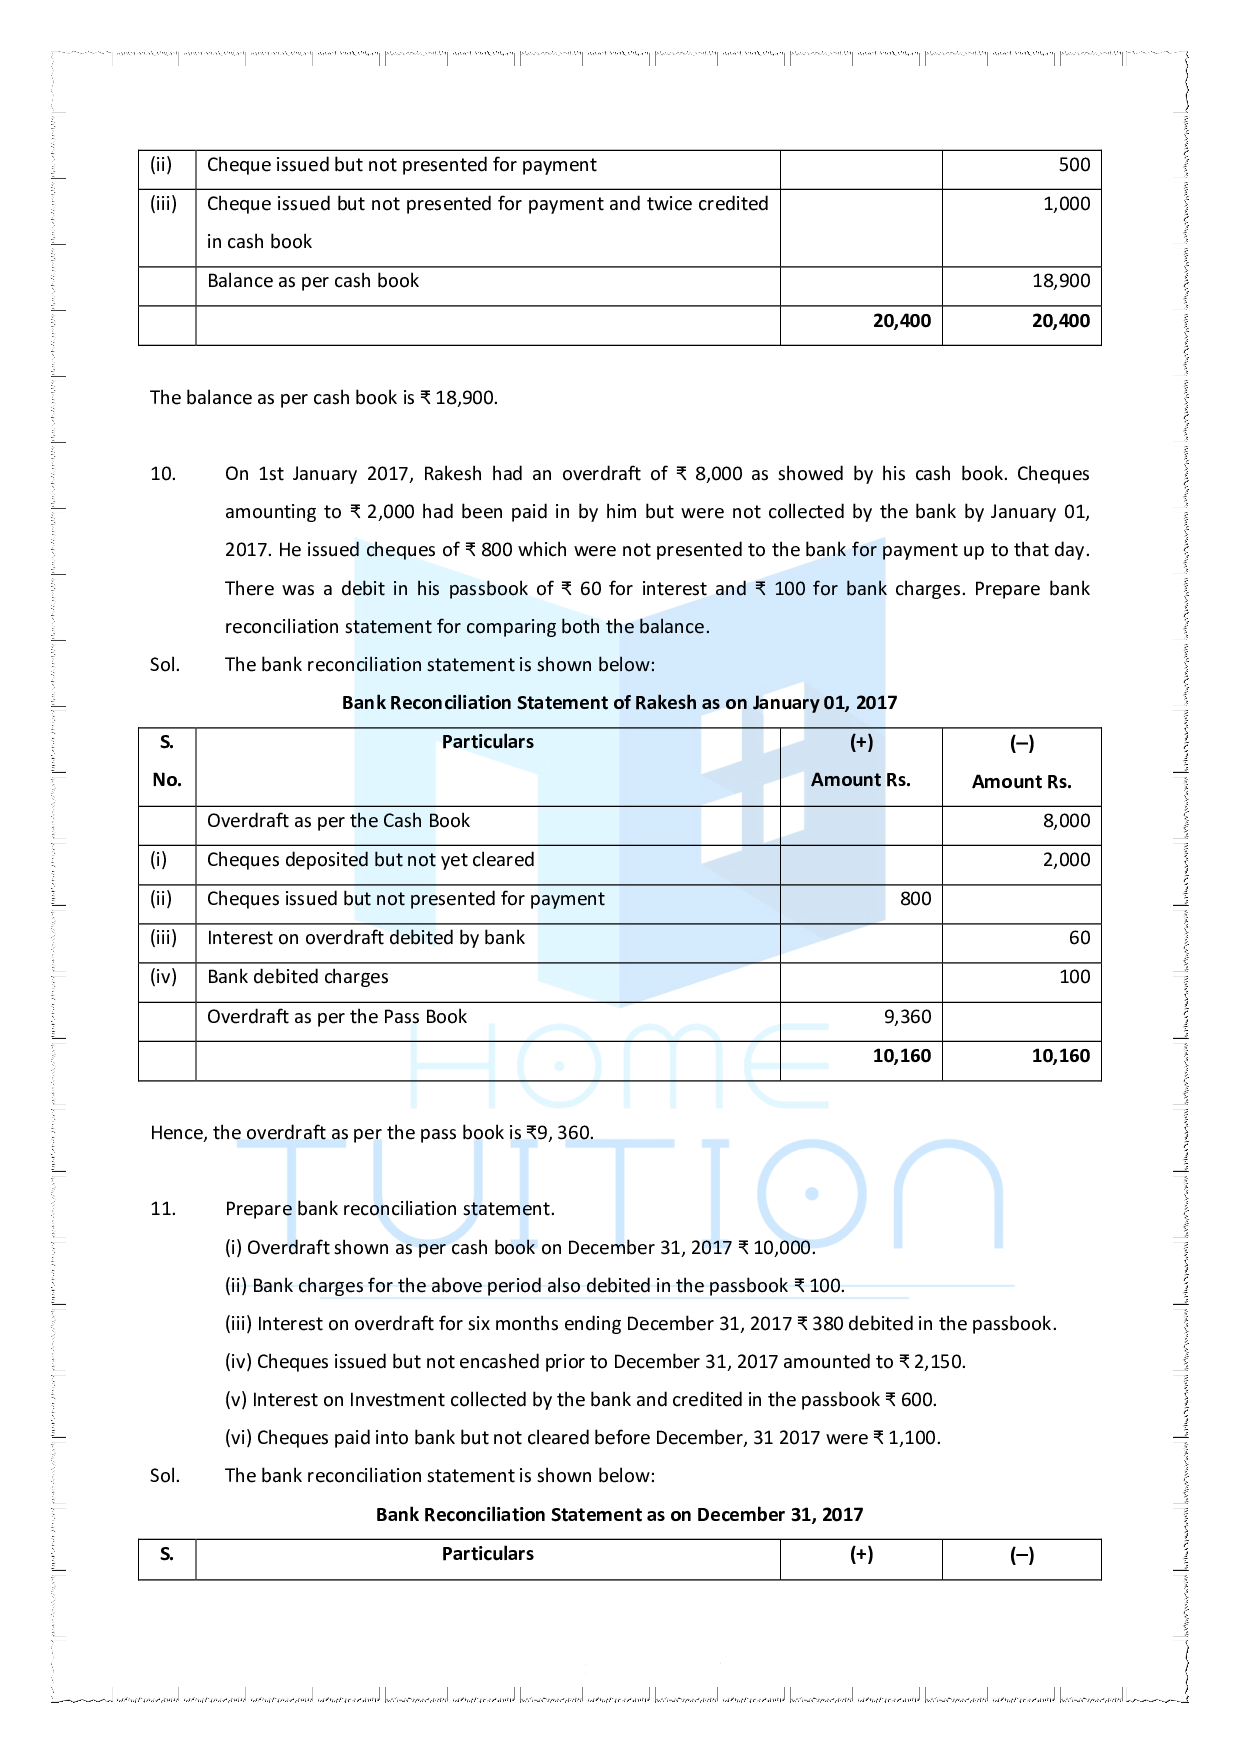 NCERT Solutions Chapter 5-Bank Reconciliation statement